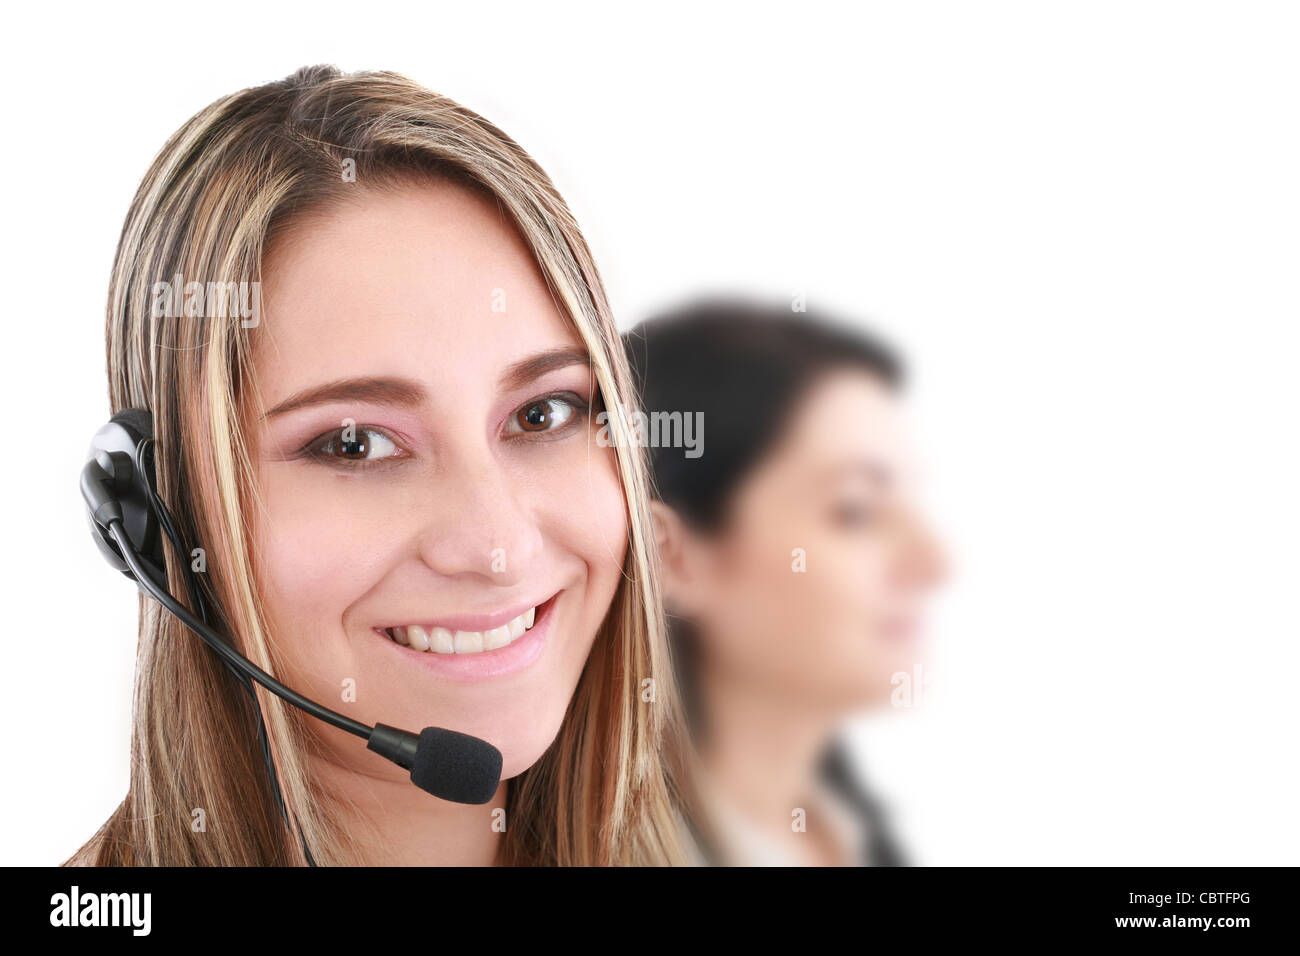 Belle representative smiling woman with headset call center. Banque D'Images